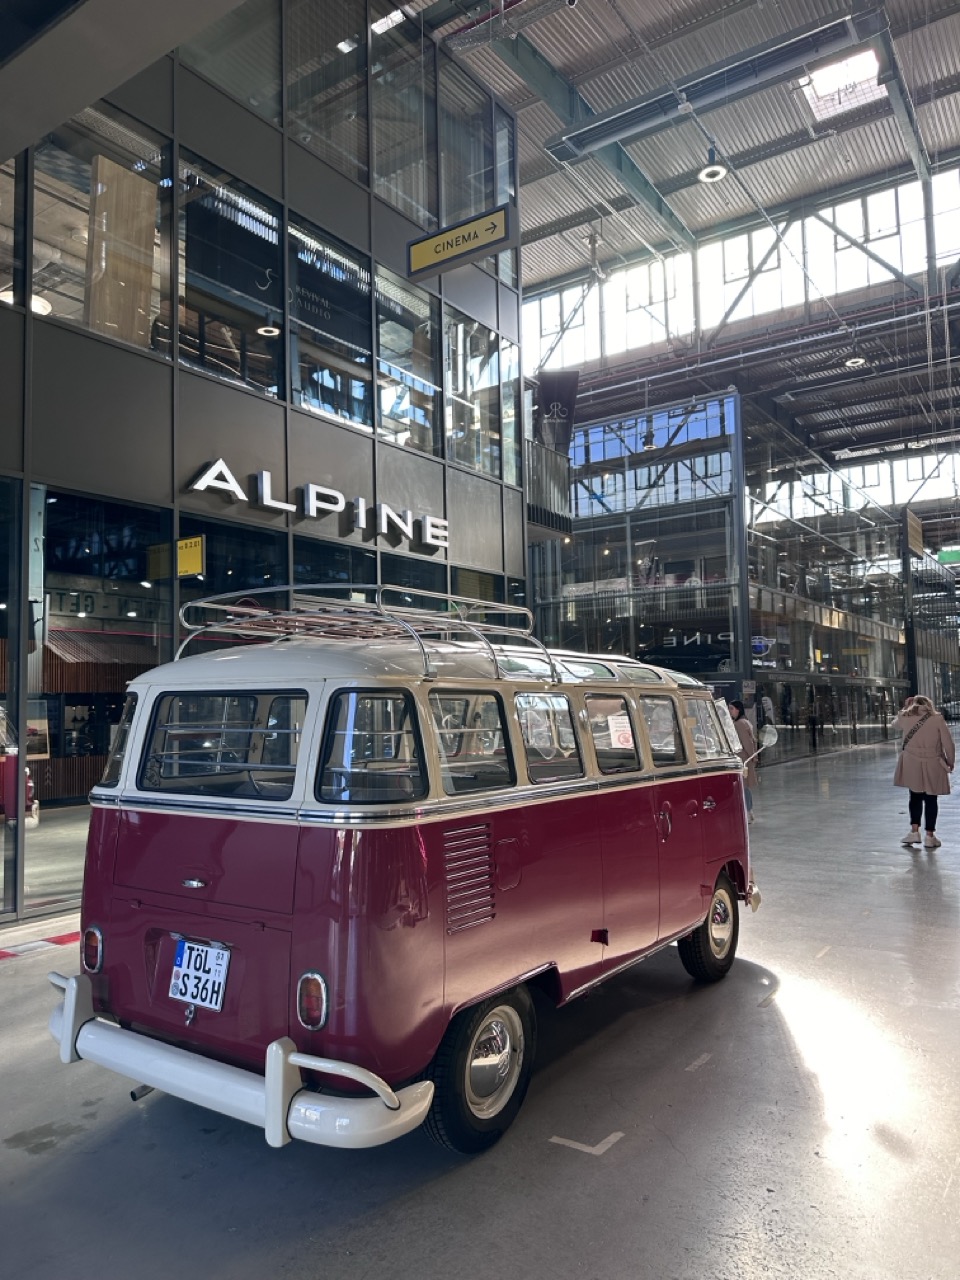 I took a short break and headed over the road to Motor World, a homage to all things car. Showing off many classics in the old Deutsche Bahn repair shop. 